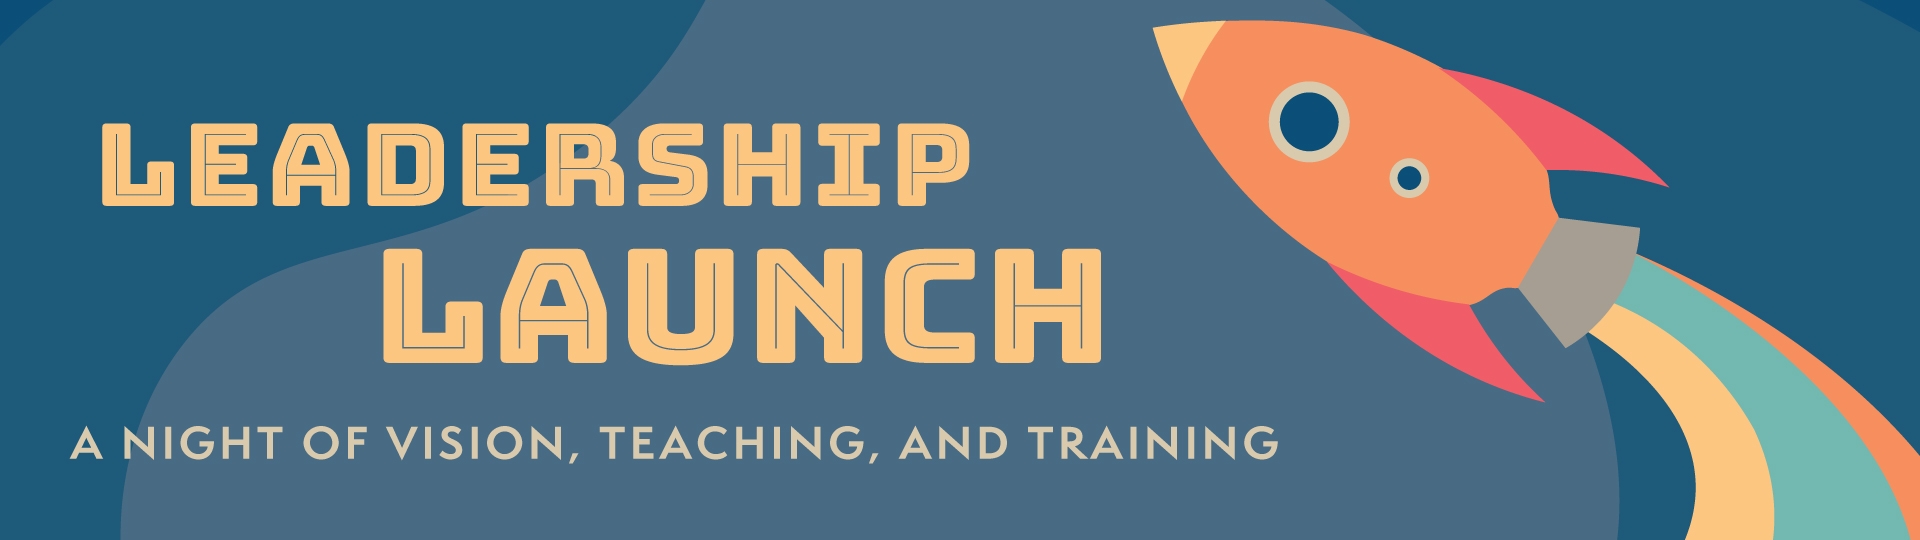 Leadership Launch - A night of vision, teaching ,and training